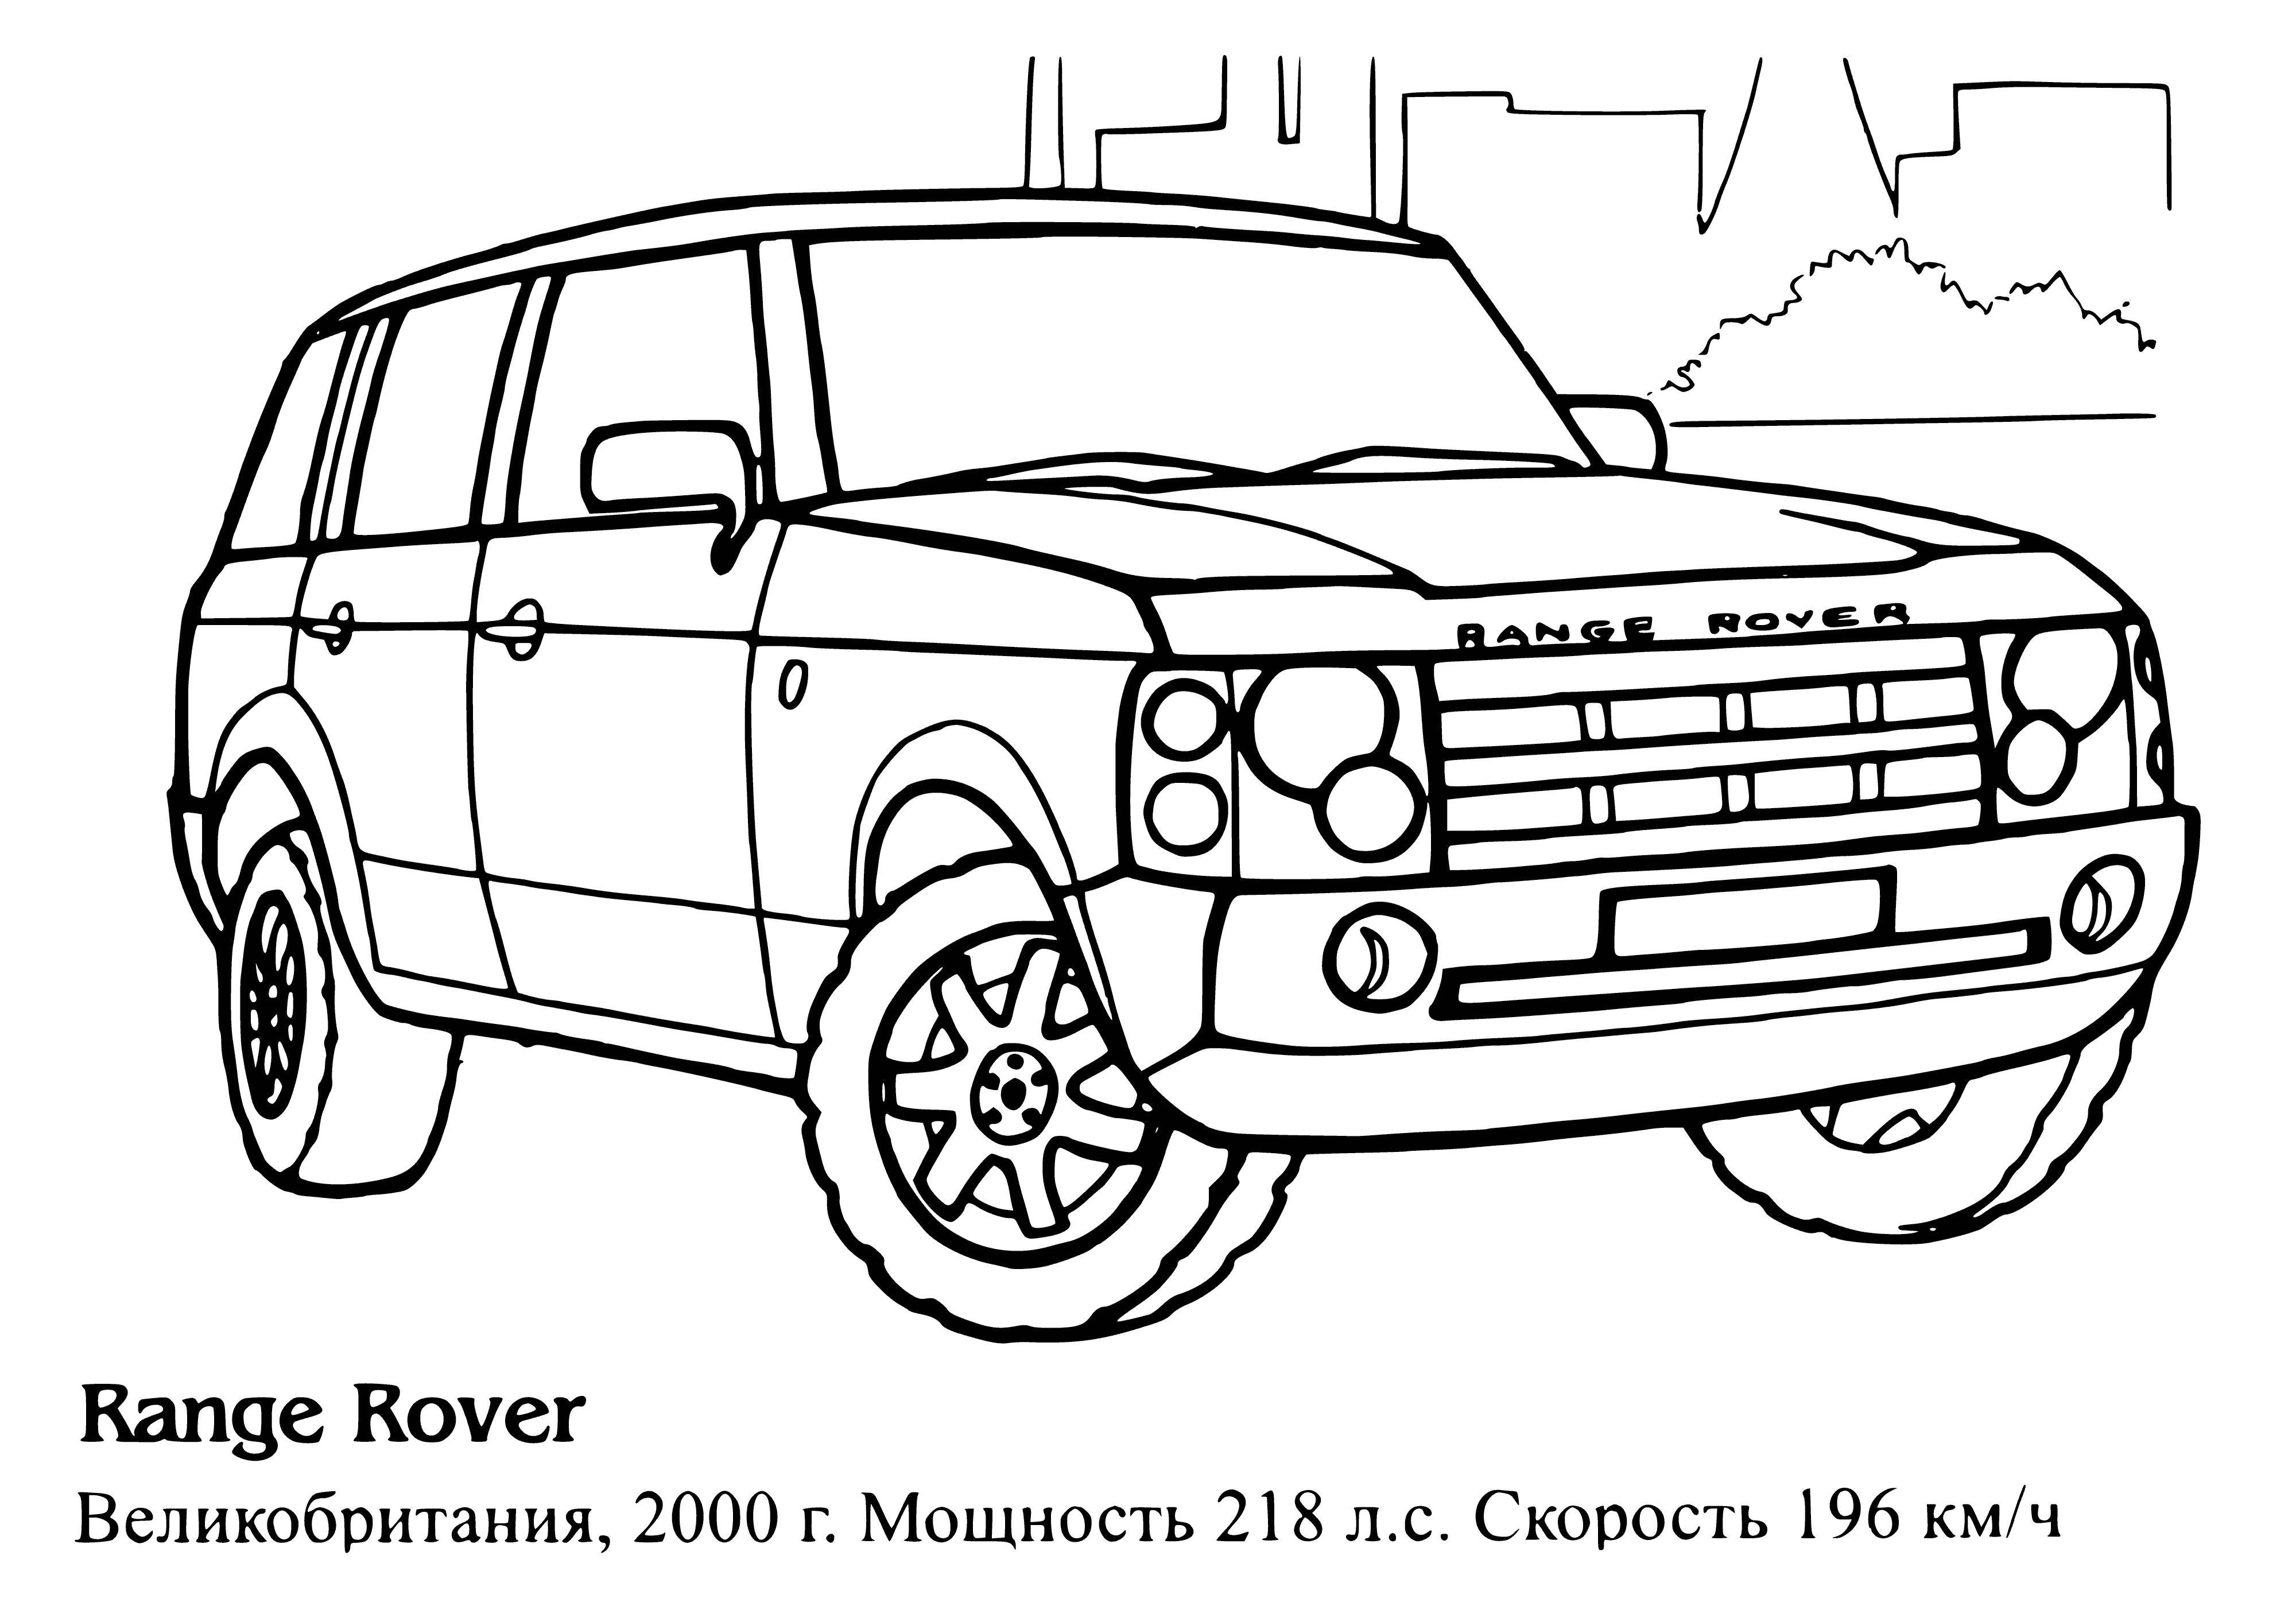 coloring page: Coloring page of four-door SUV w/ aluminum body, plastic sides, headlights, taillights, 4WD & AWD, V8 engine, top speed 170mph.